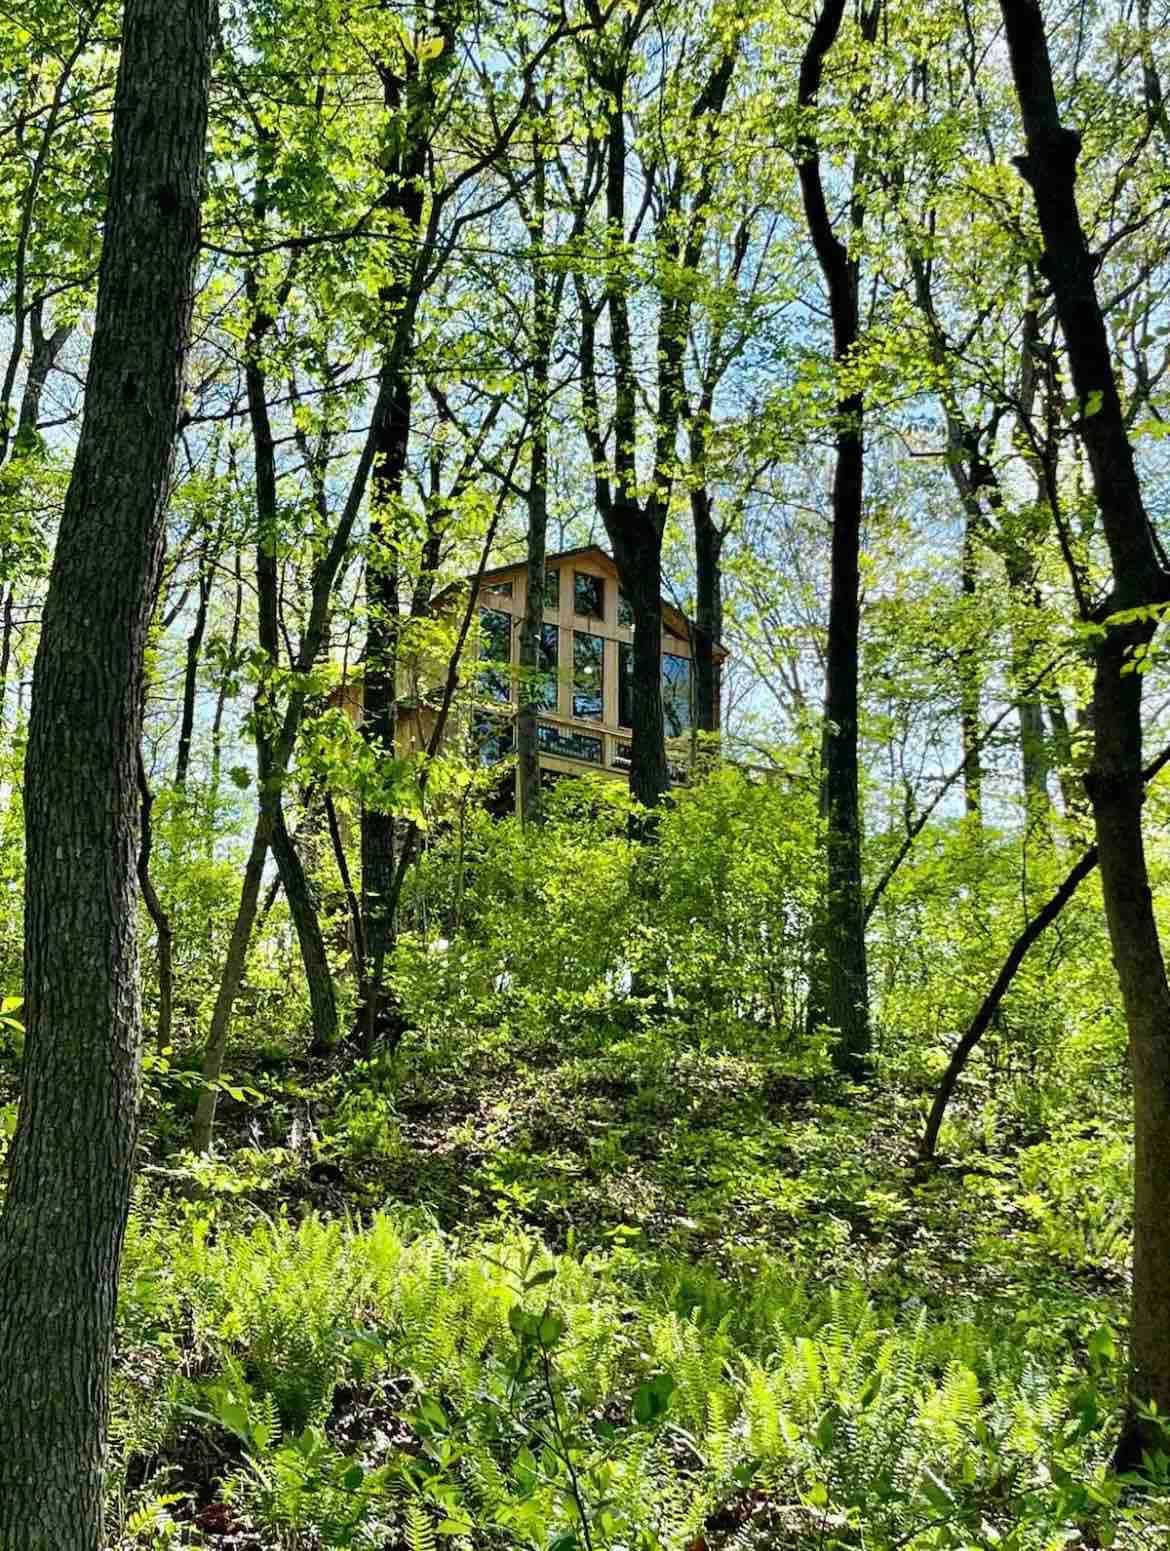 The Hideaway Treehouse